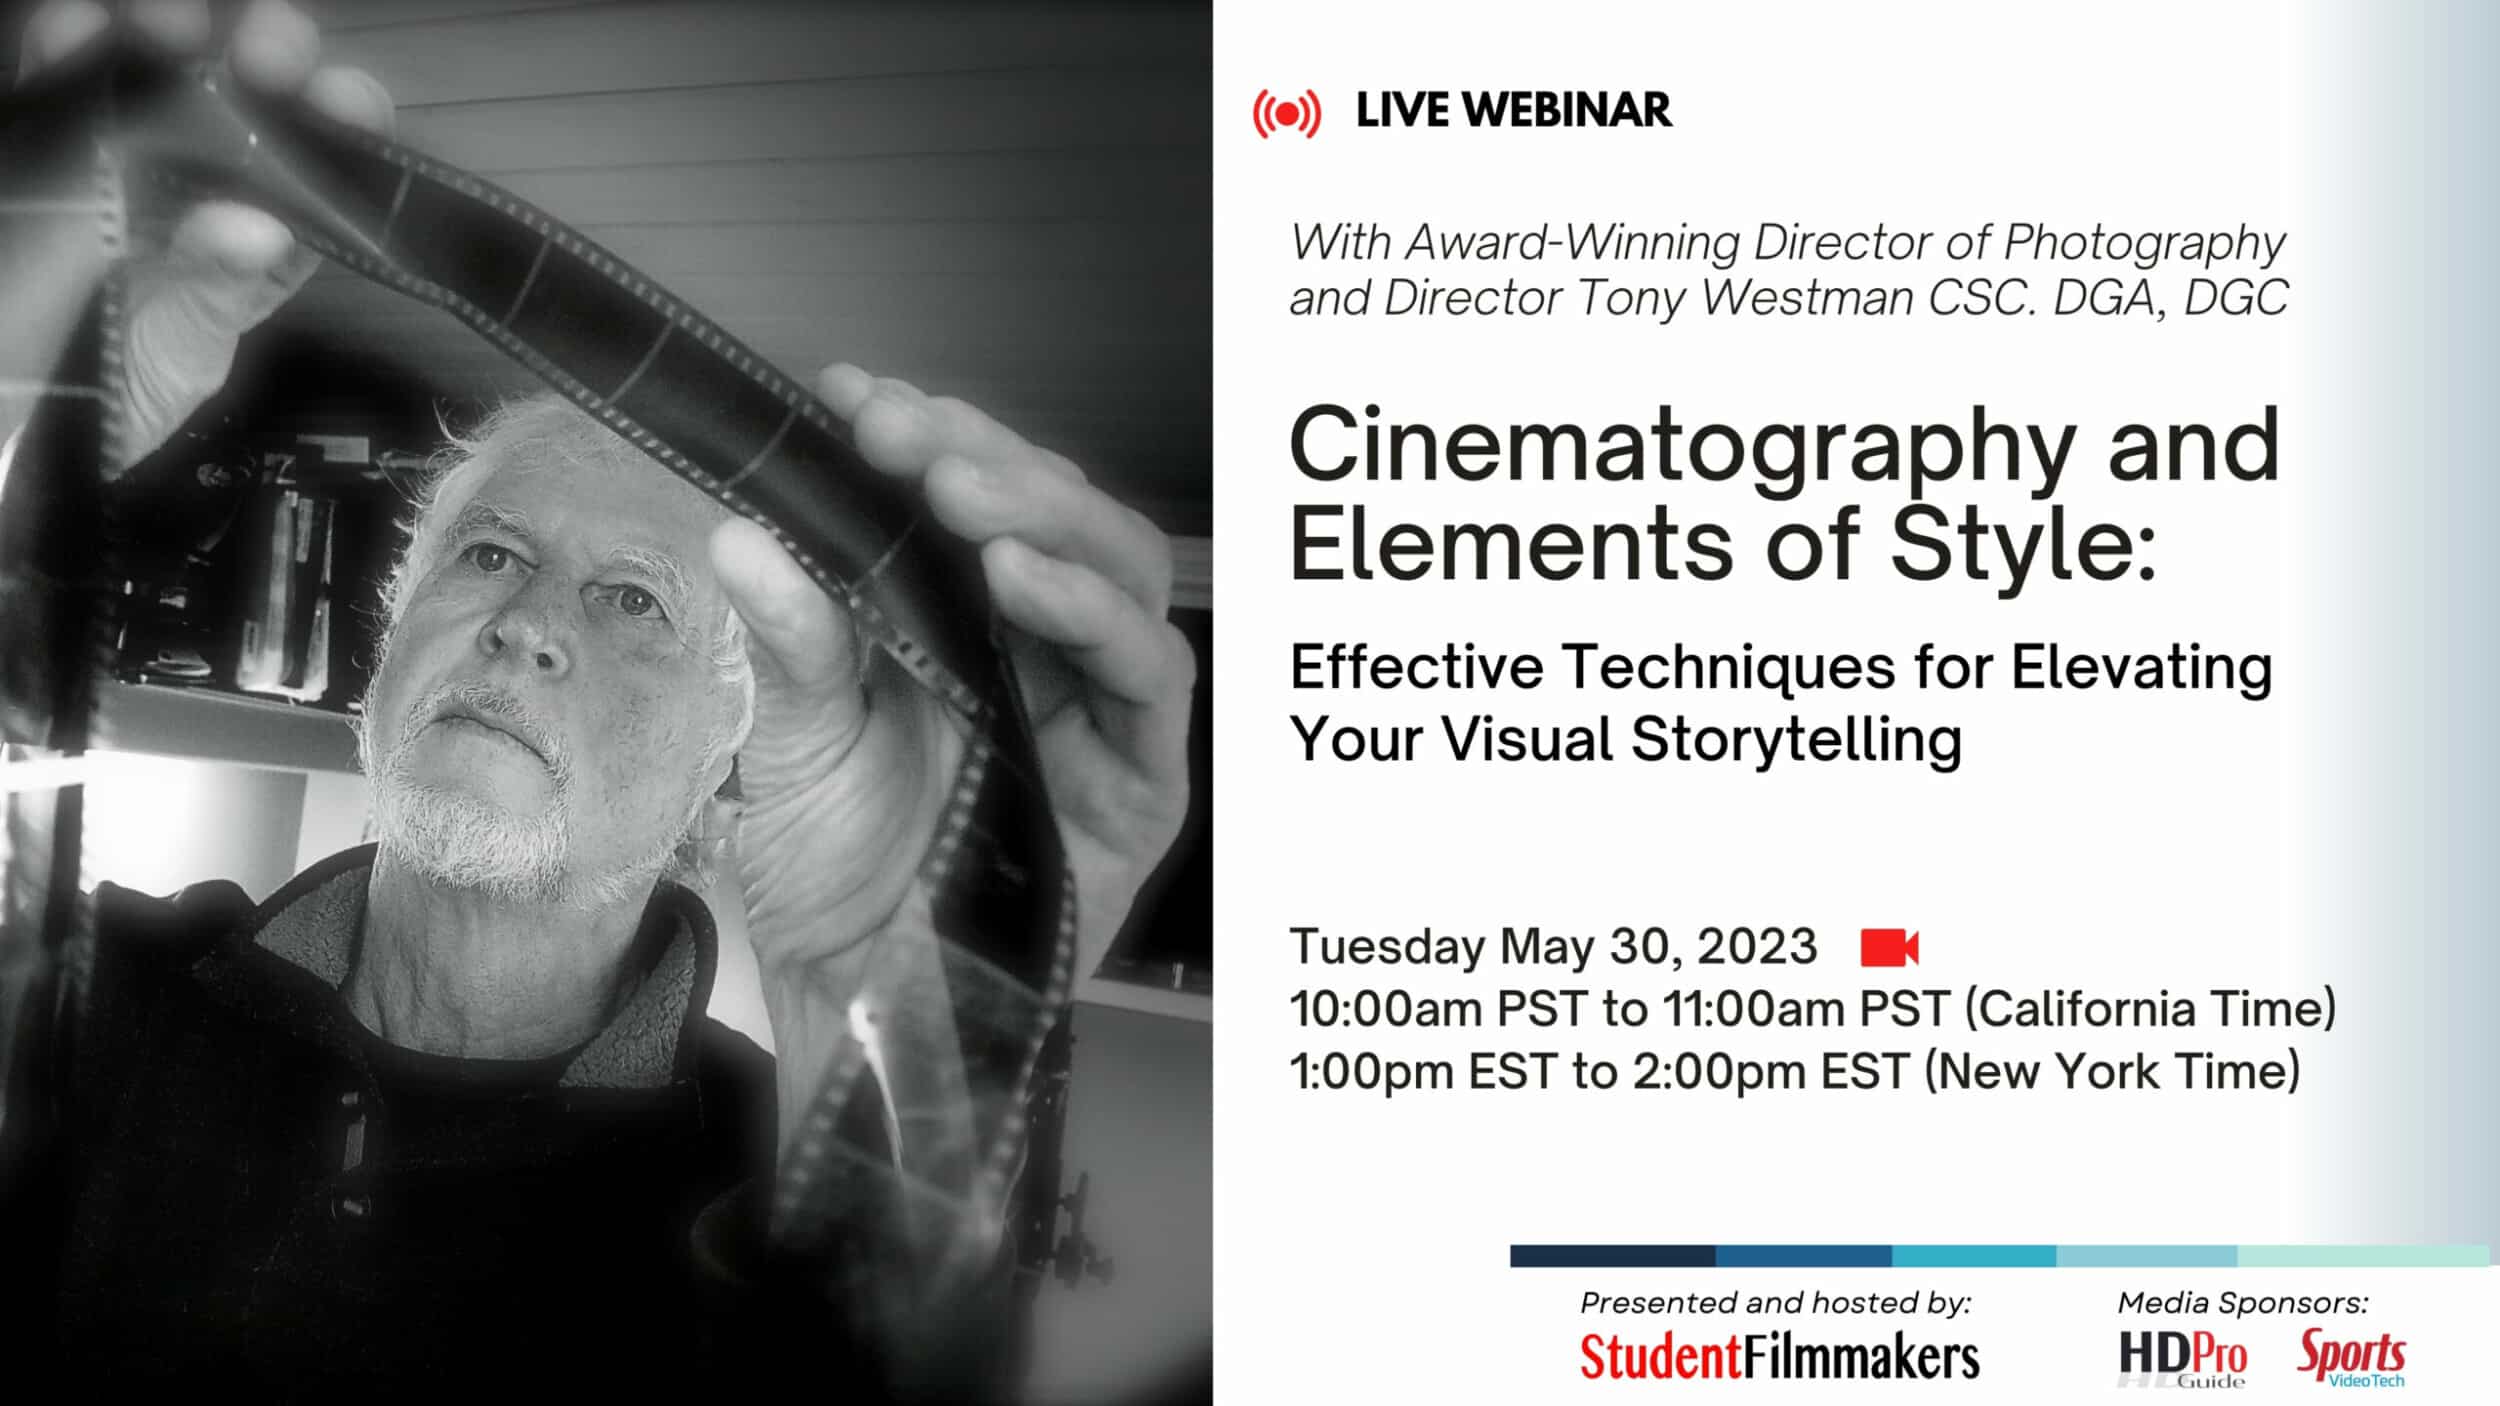 Cinematography & Elements of Style: Effective Techniques for Elevating Your Visual Storytelling With Award-Winning Director of Photography and Director Tony Westman CSC. DGA, DGC. Produced and hosted by StudentFilmmakers.com and Student Filmmakers Magazine,